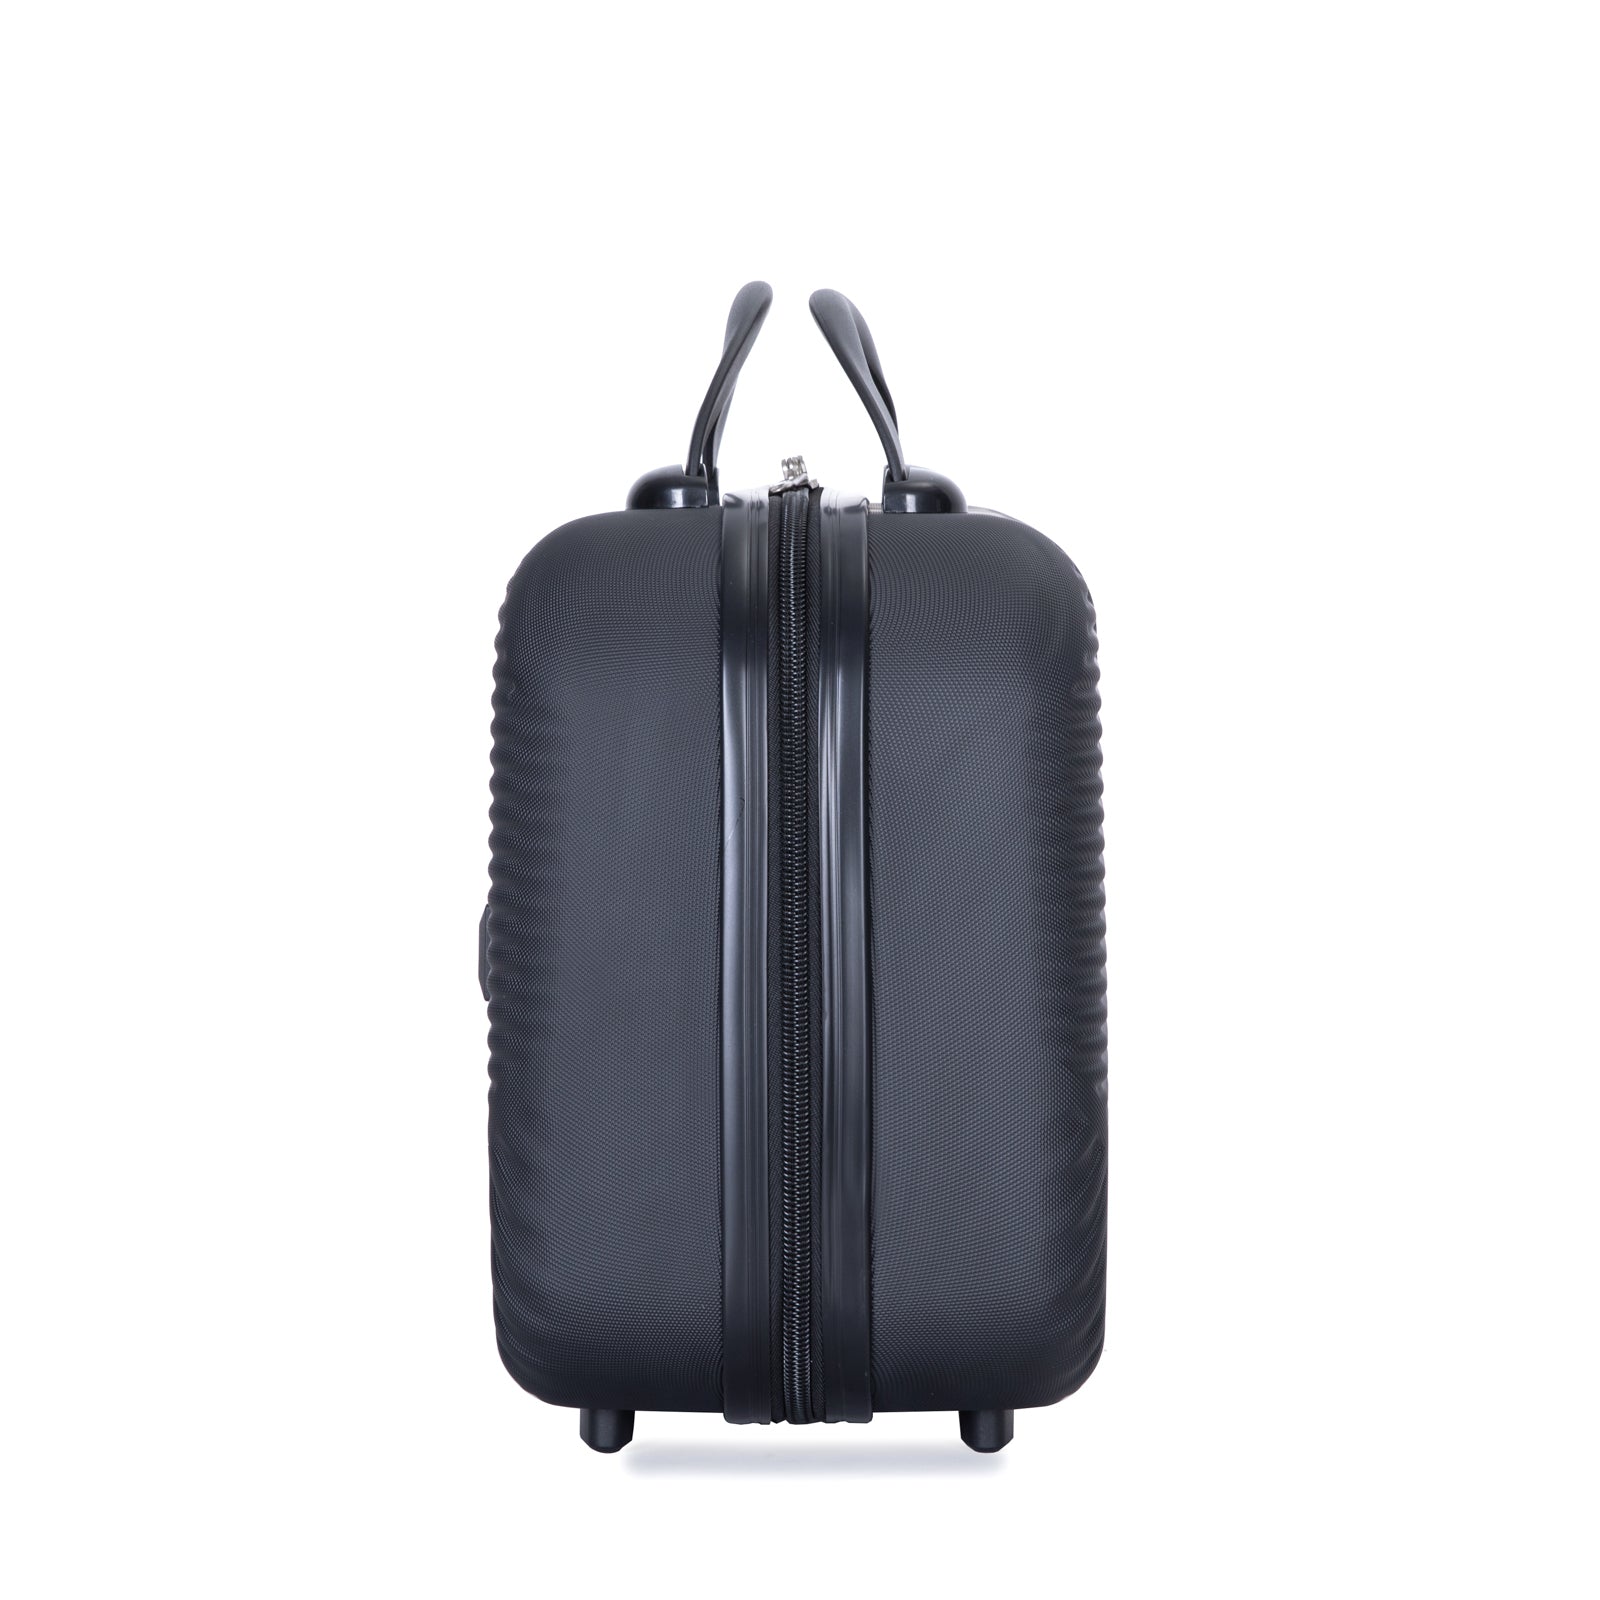 2Piece Luggage Sets ABS Lightweight Suitcase , Spinner black-abs